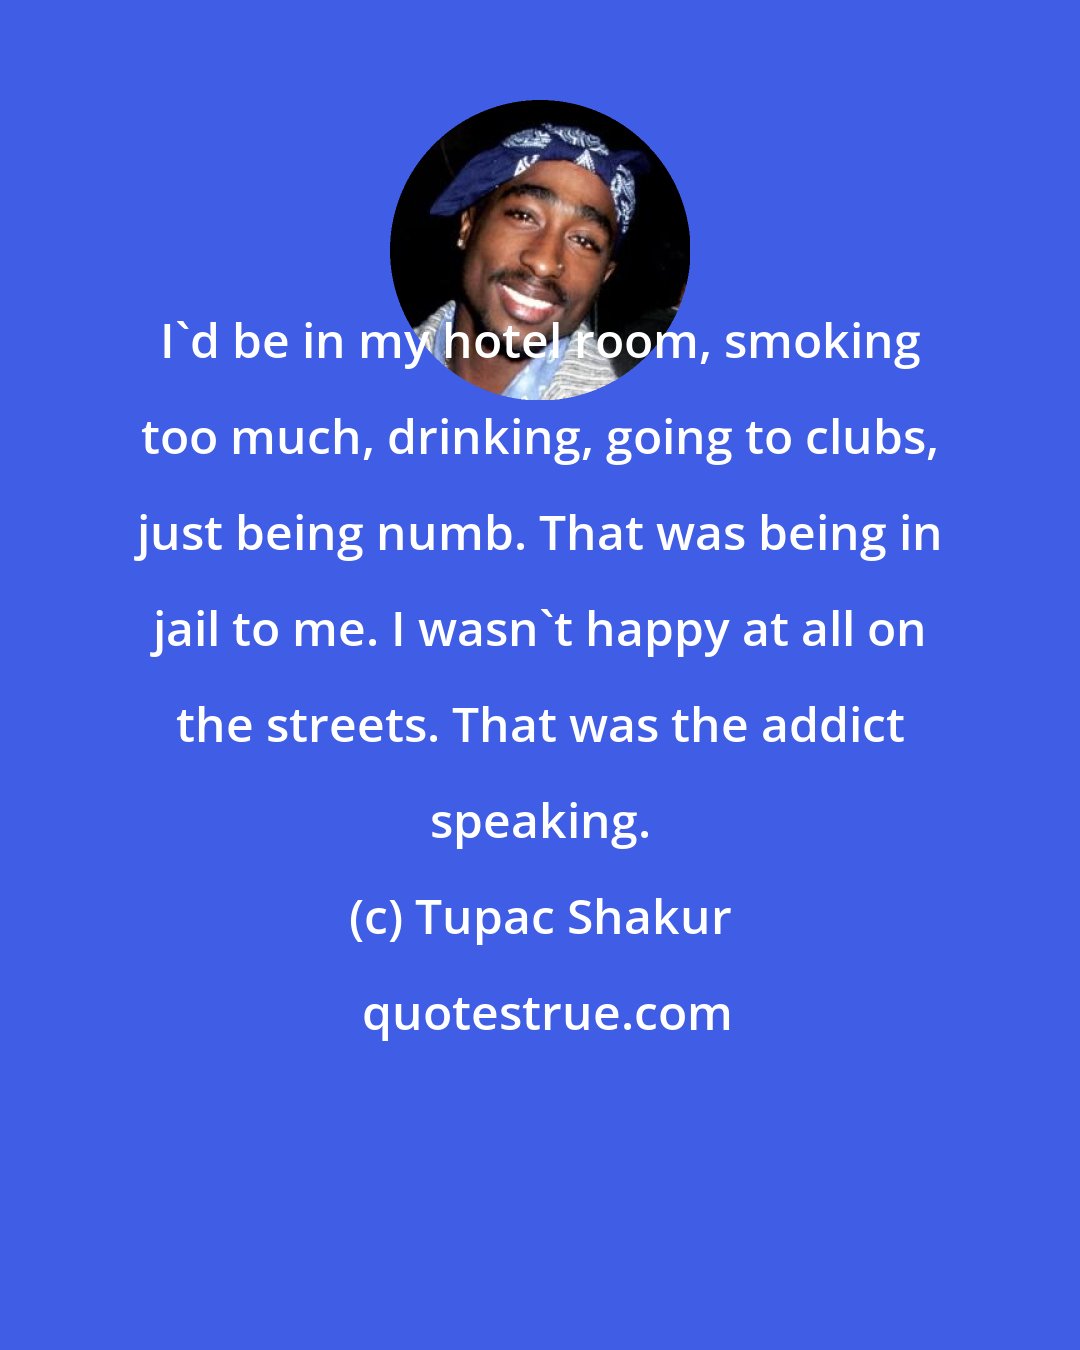 Tupac Shakur: I'd be in my hotel room, smoking too much, drinking, going to clubs, just being numb. That was being in jail to me. I wasn't happy at all on the streets. That was the addict speaking.